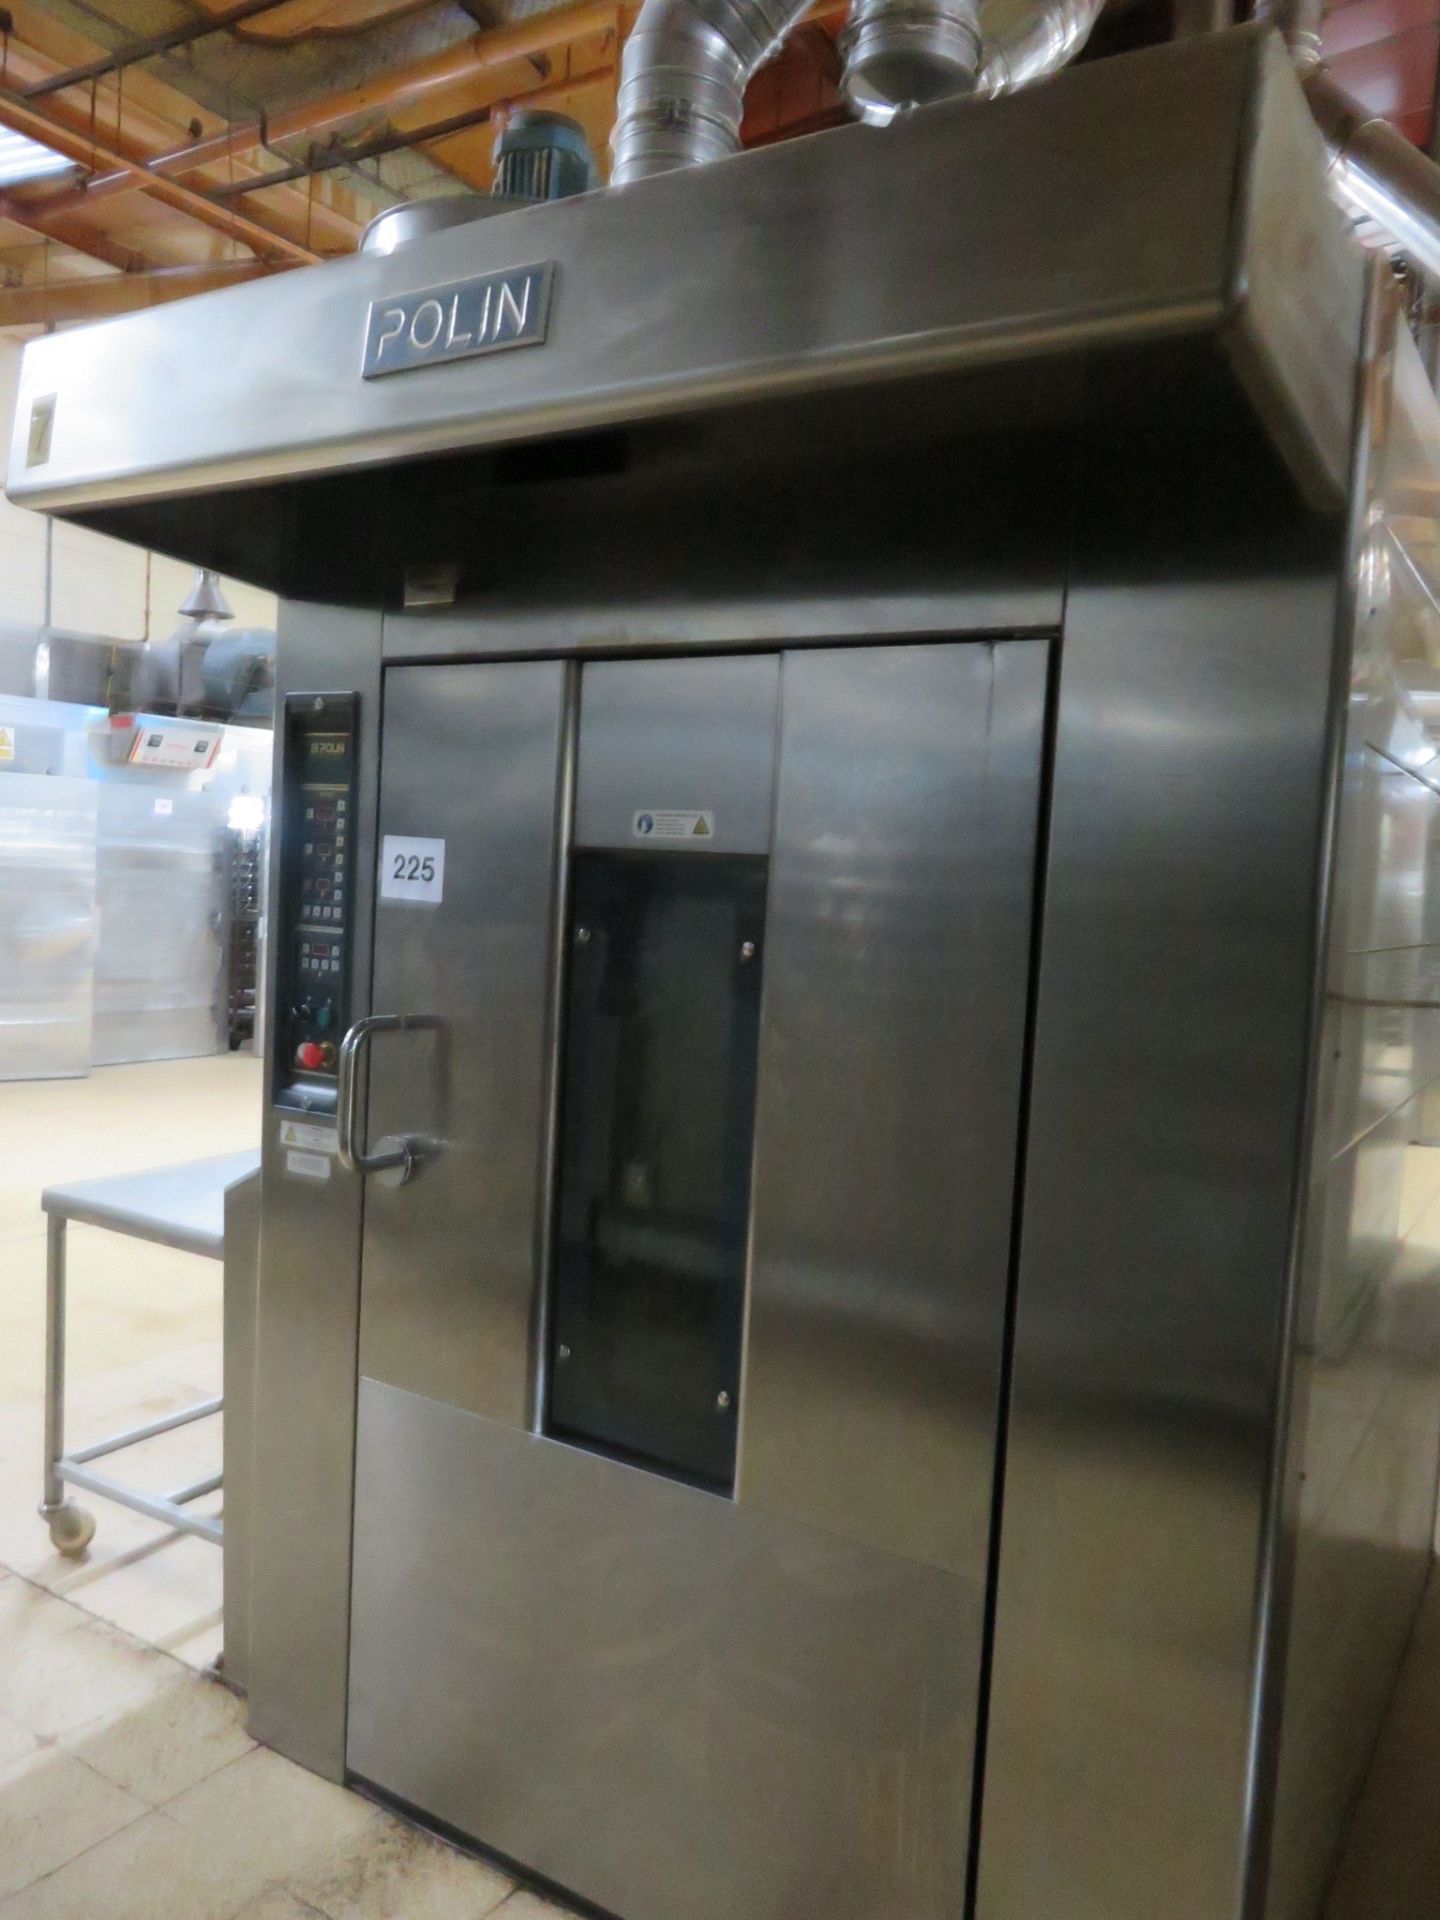 Polin S/s gas fired Oven. Takes 1 x double Rotary Rack Type B23 . Lift Out £300 - Image 2 of 2